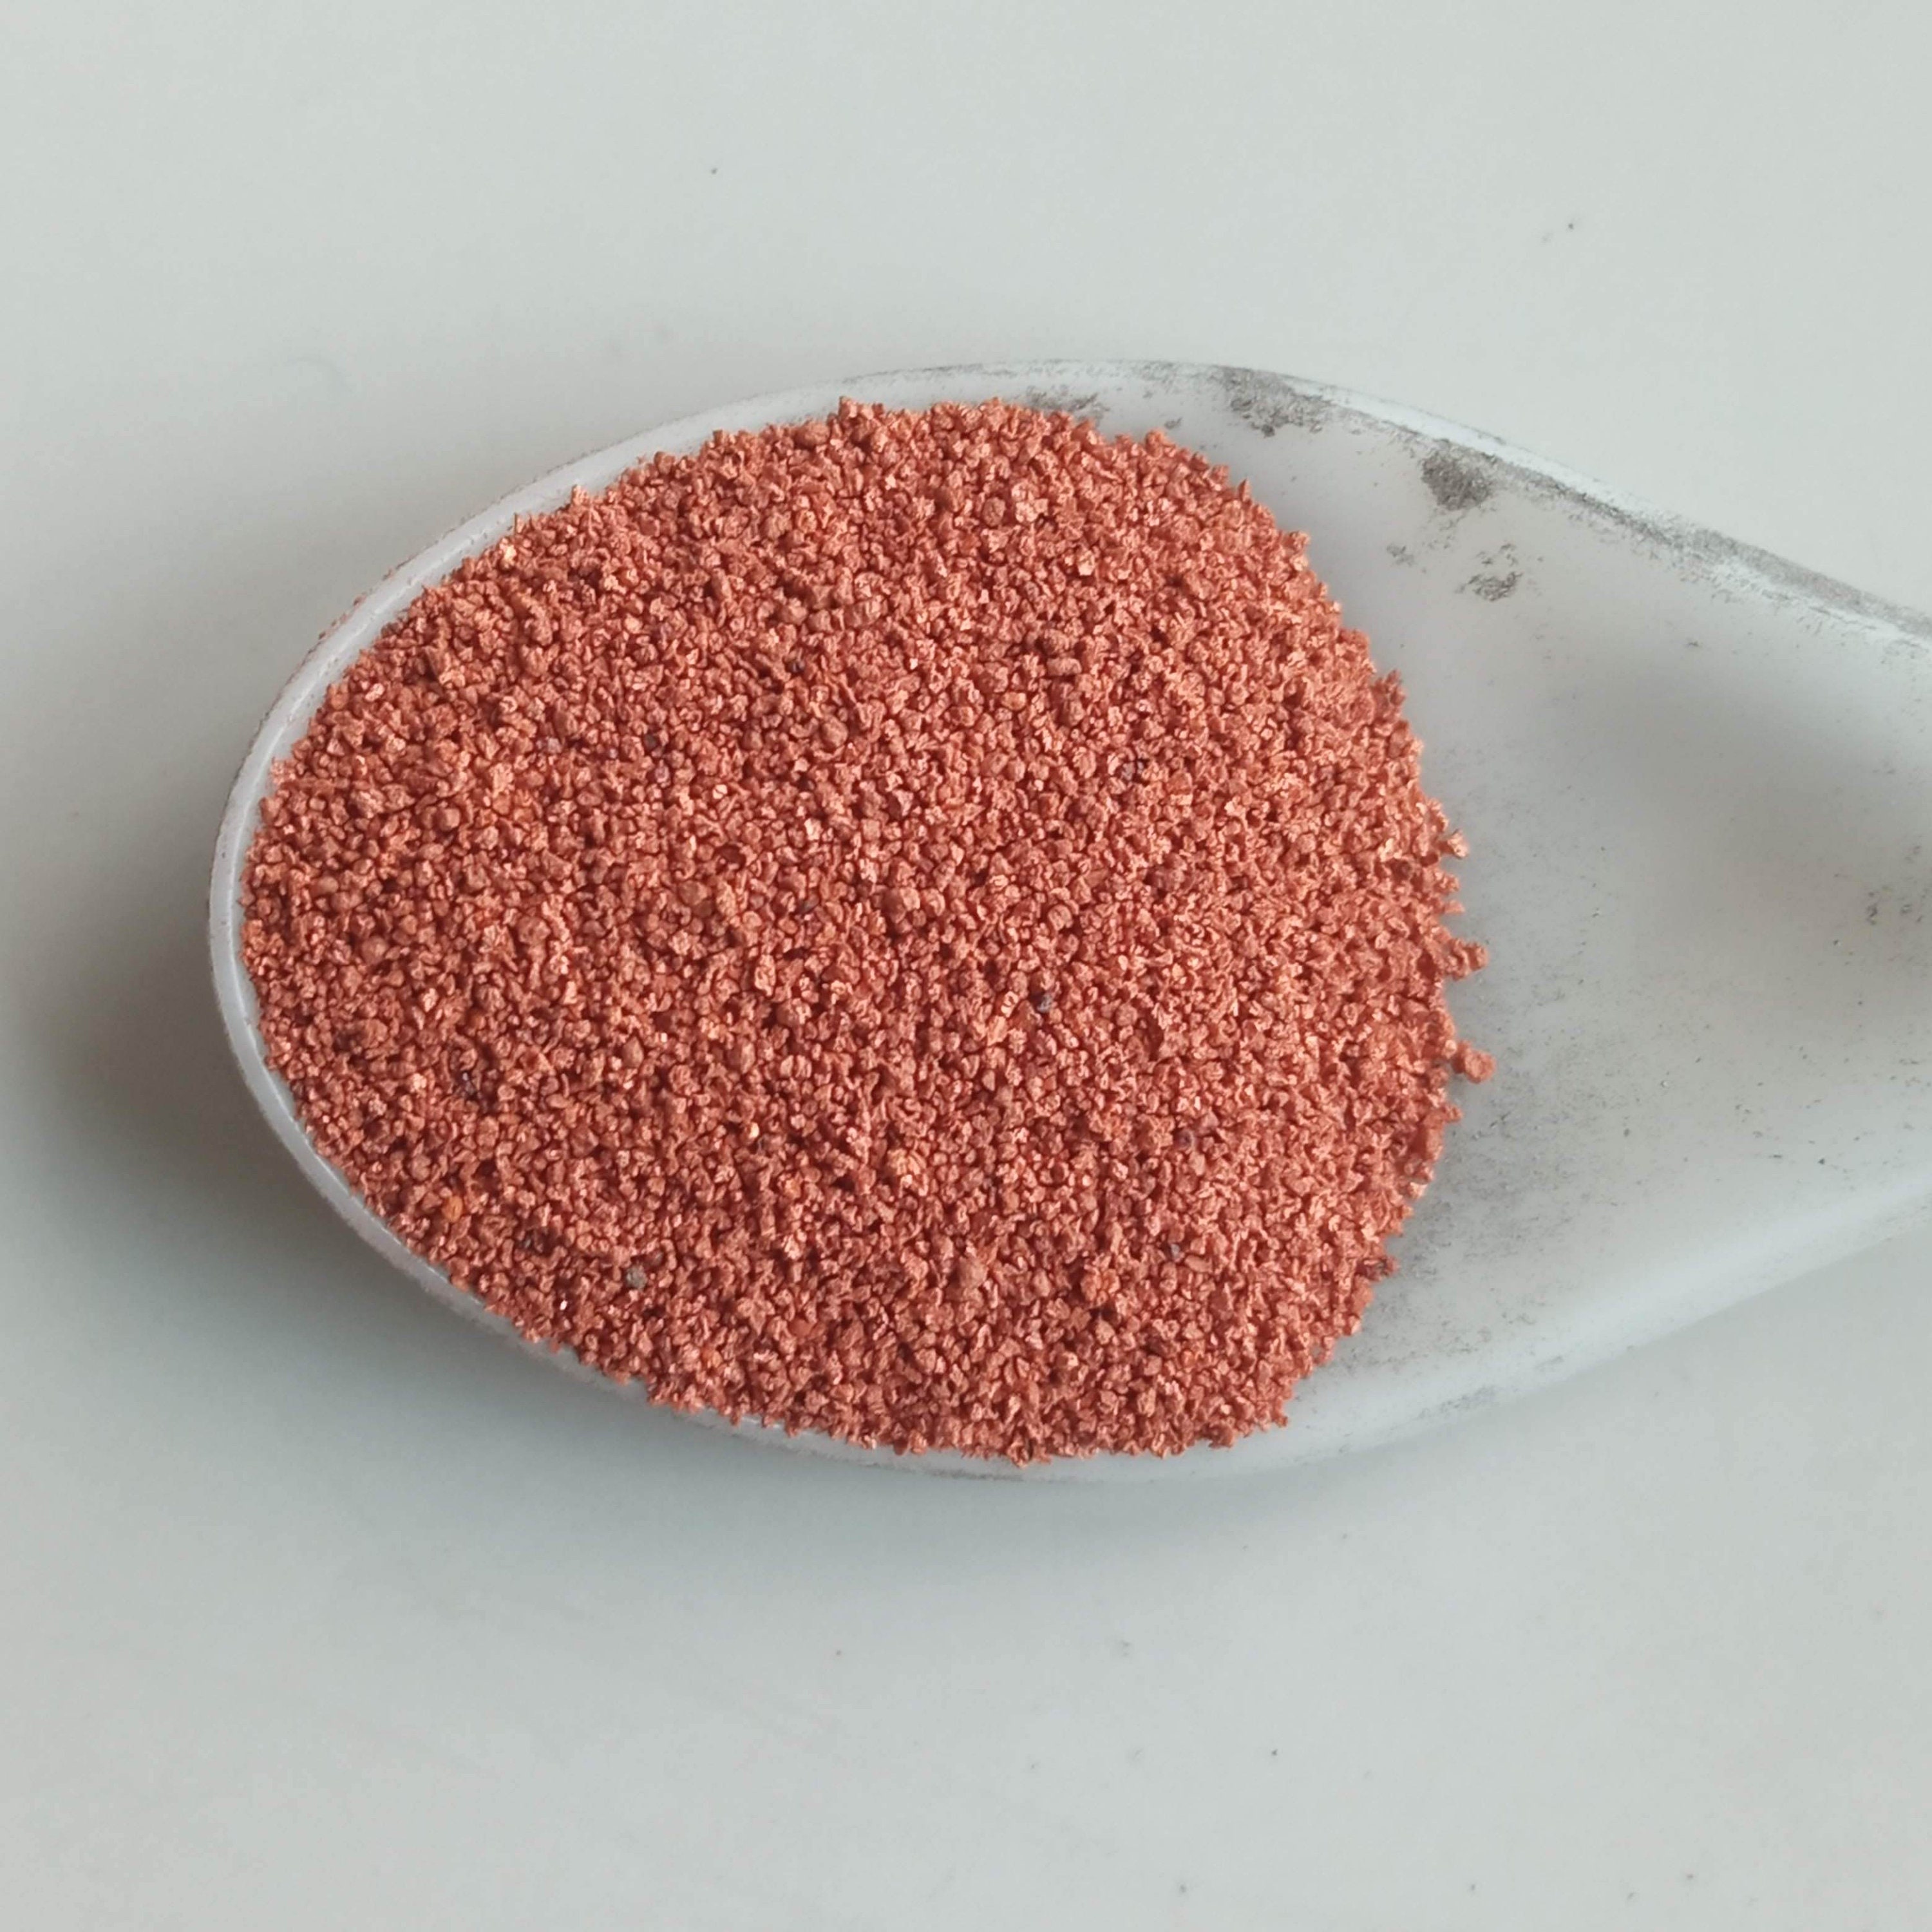 Atomized Copper Powder 325 Mesh for Inlay, Coldcasting, Resin and Pigment  Applications, or Mineral Art 